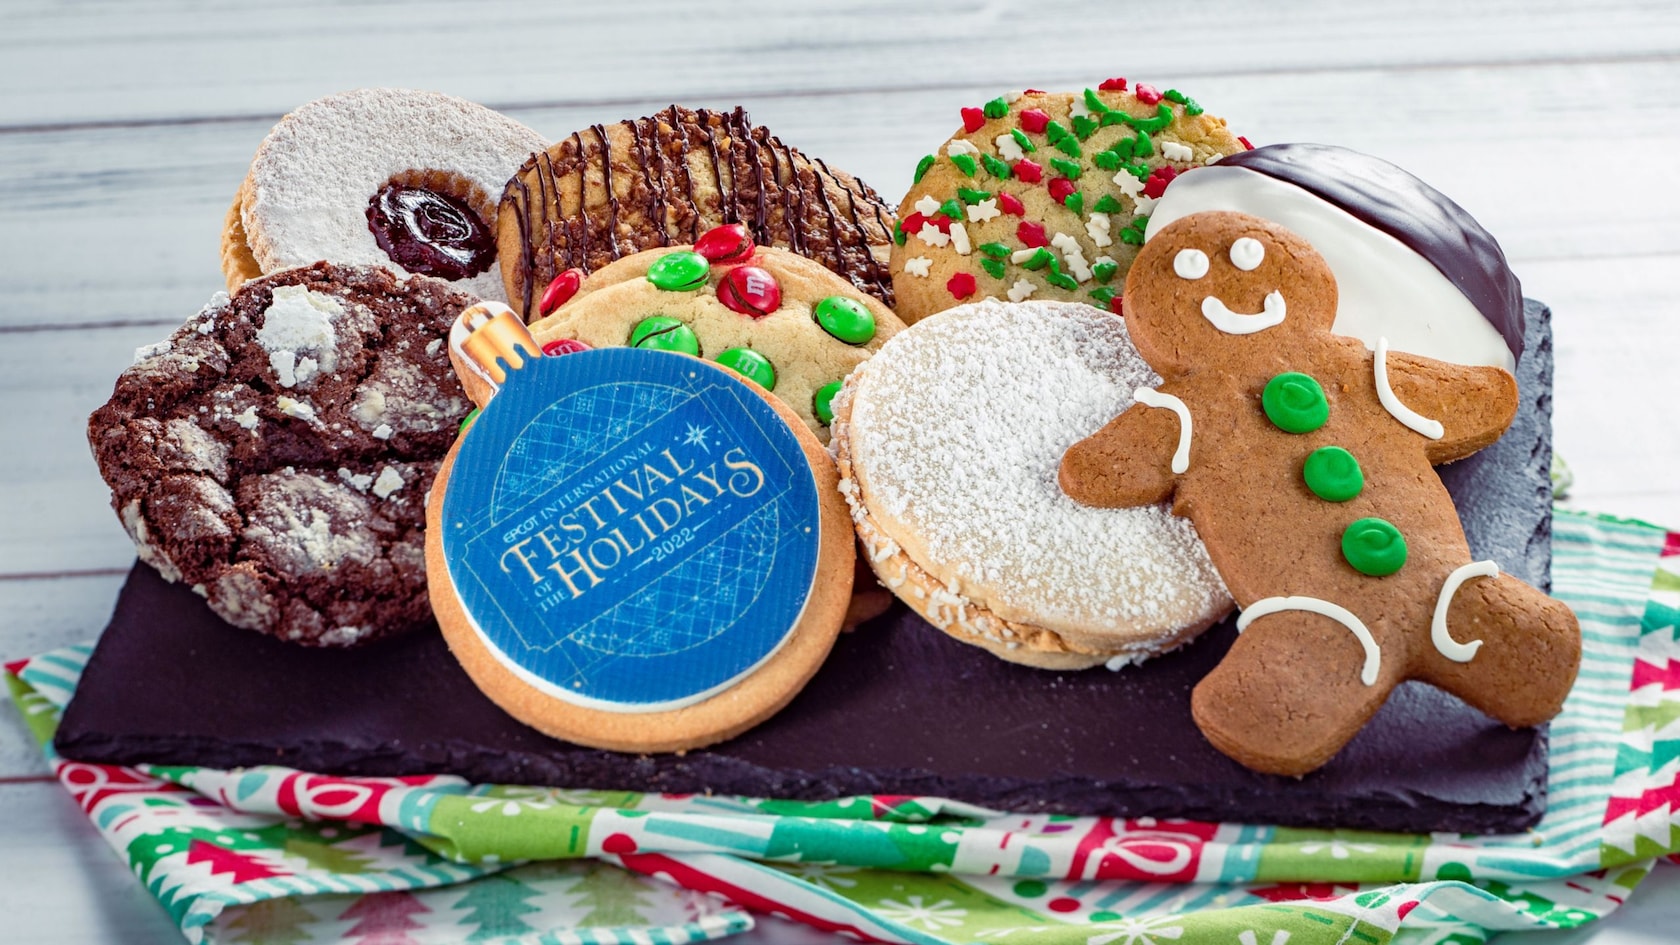 An assortment of holiday themed cookies, including a gingerbread man and one in the shape of a Christmas tree ornament